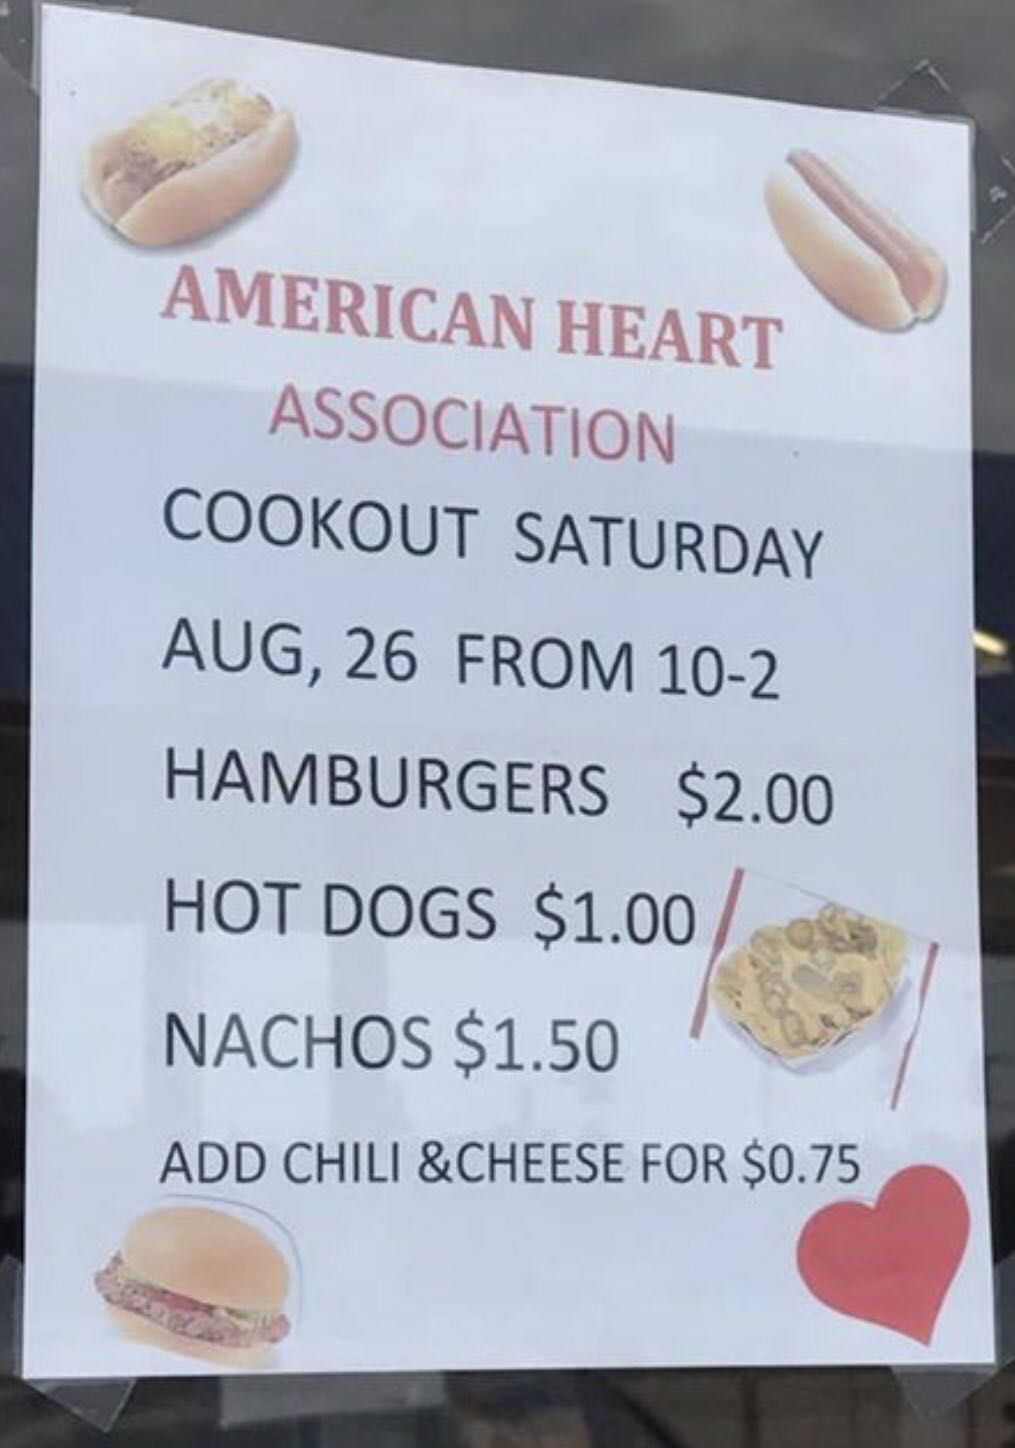 Menu for American Heart Association does not look healthy for your heart.